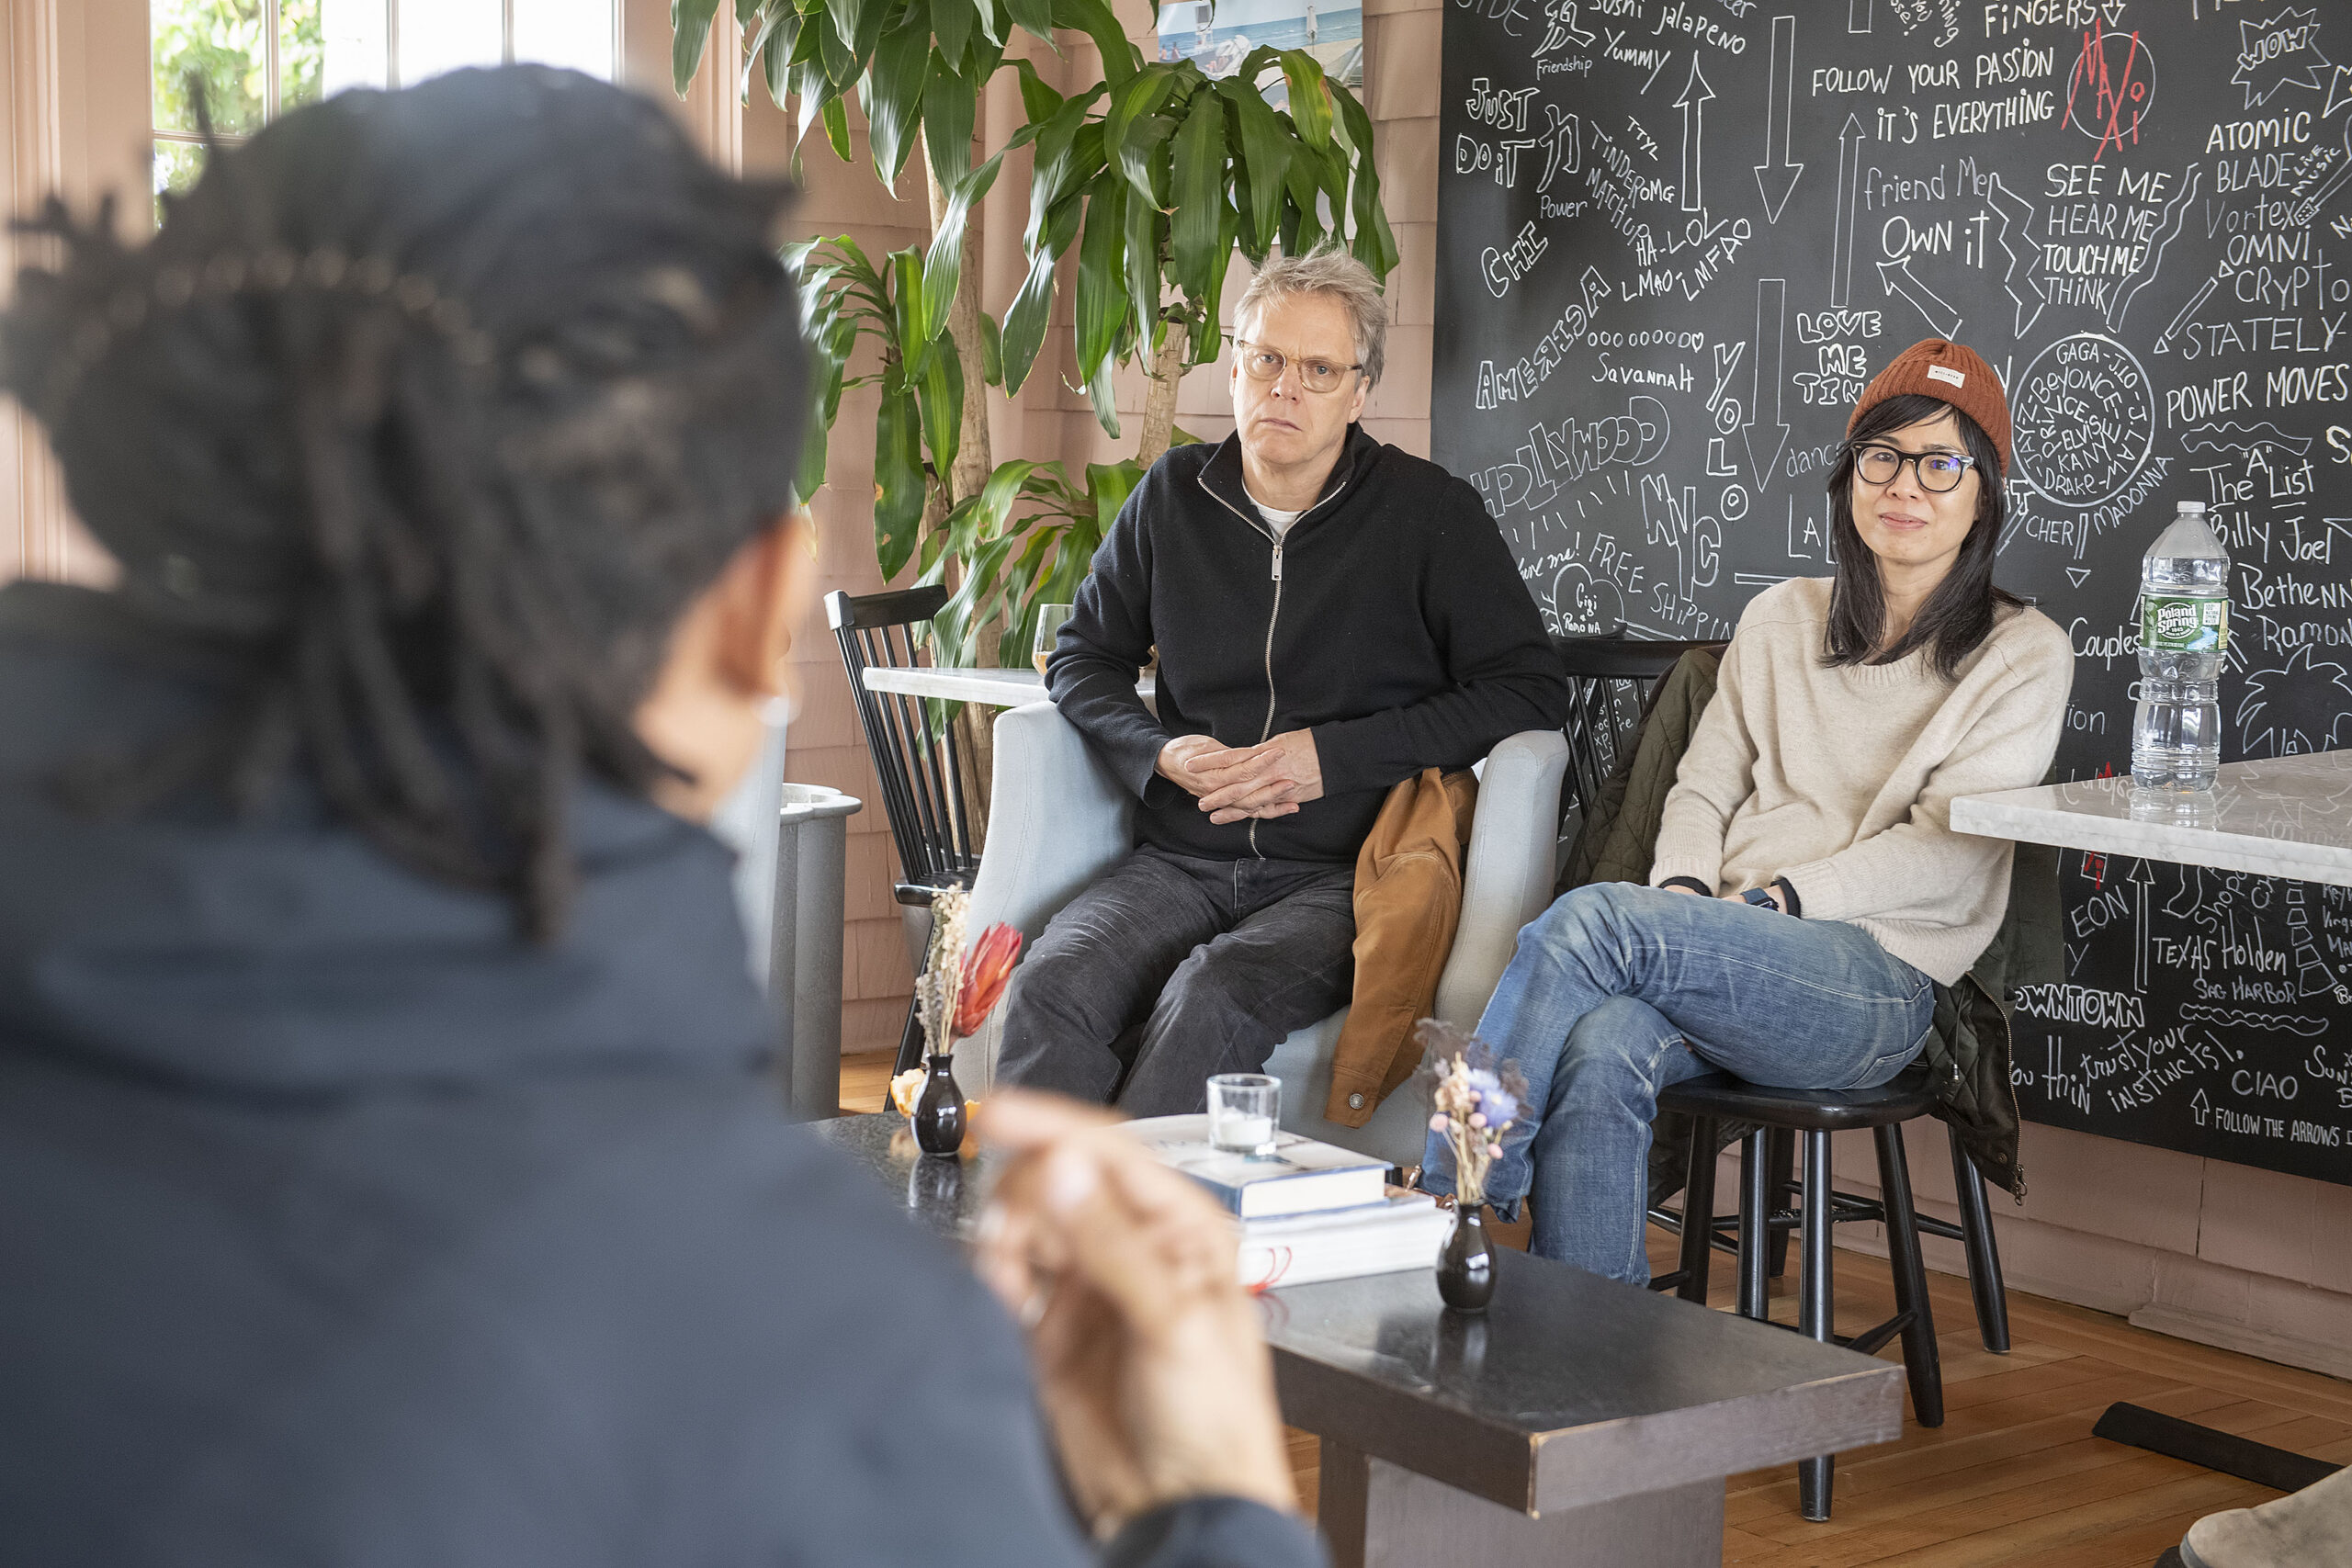 Mentors Peter Hedges and Alice Wu  listen as screenwriter Jamil McGinnis shares a thought during the HamptonsFilm Screenwriters Lab, held at the Maidstone Inn in East Hampton from April 8 to 10, 2022. MICHAEL HELLER